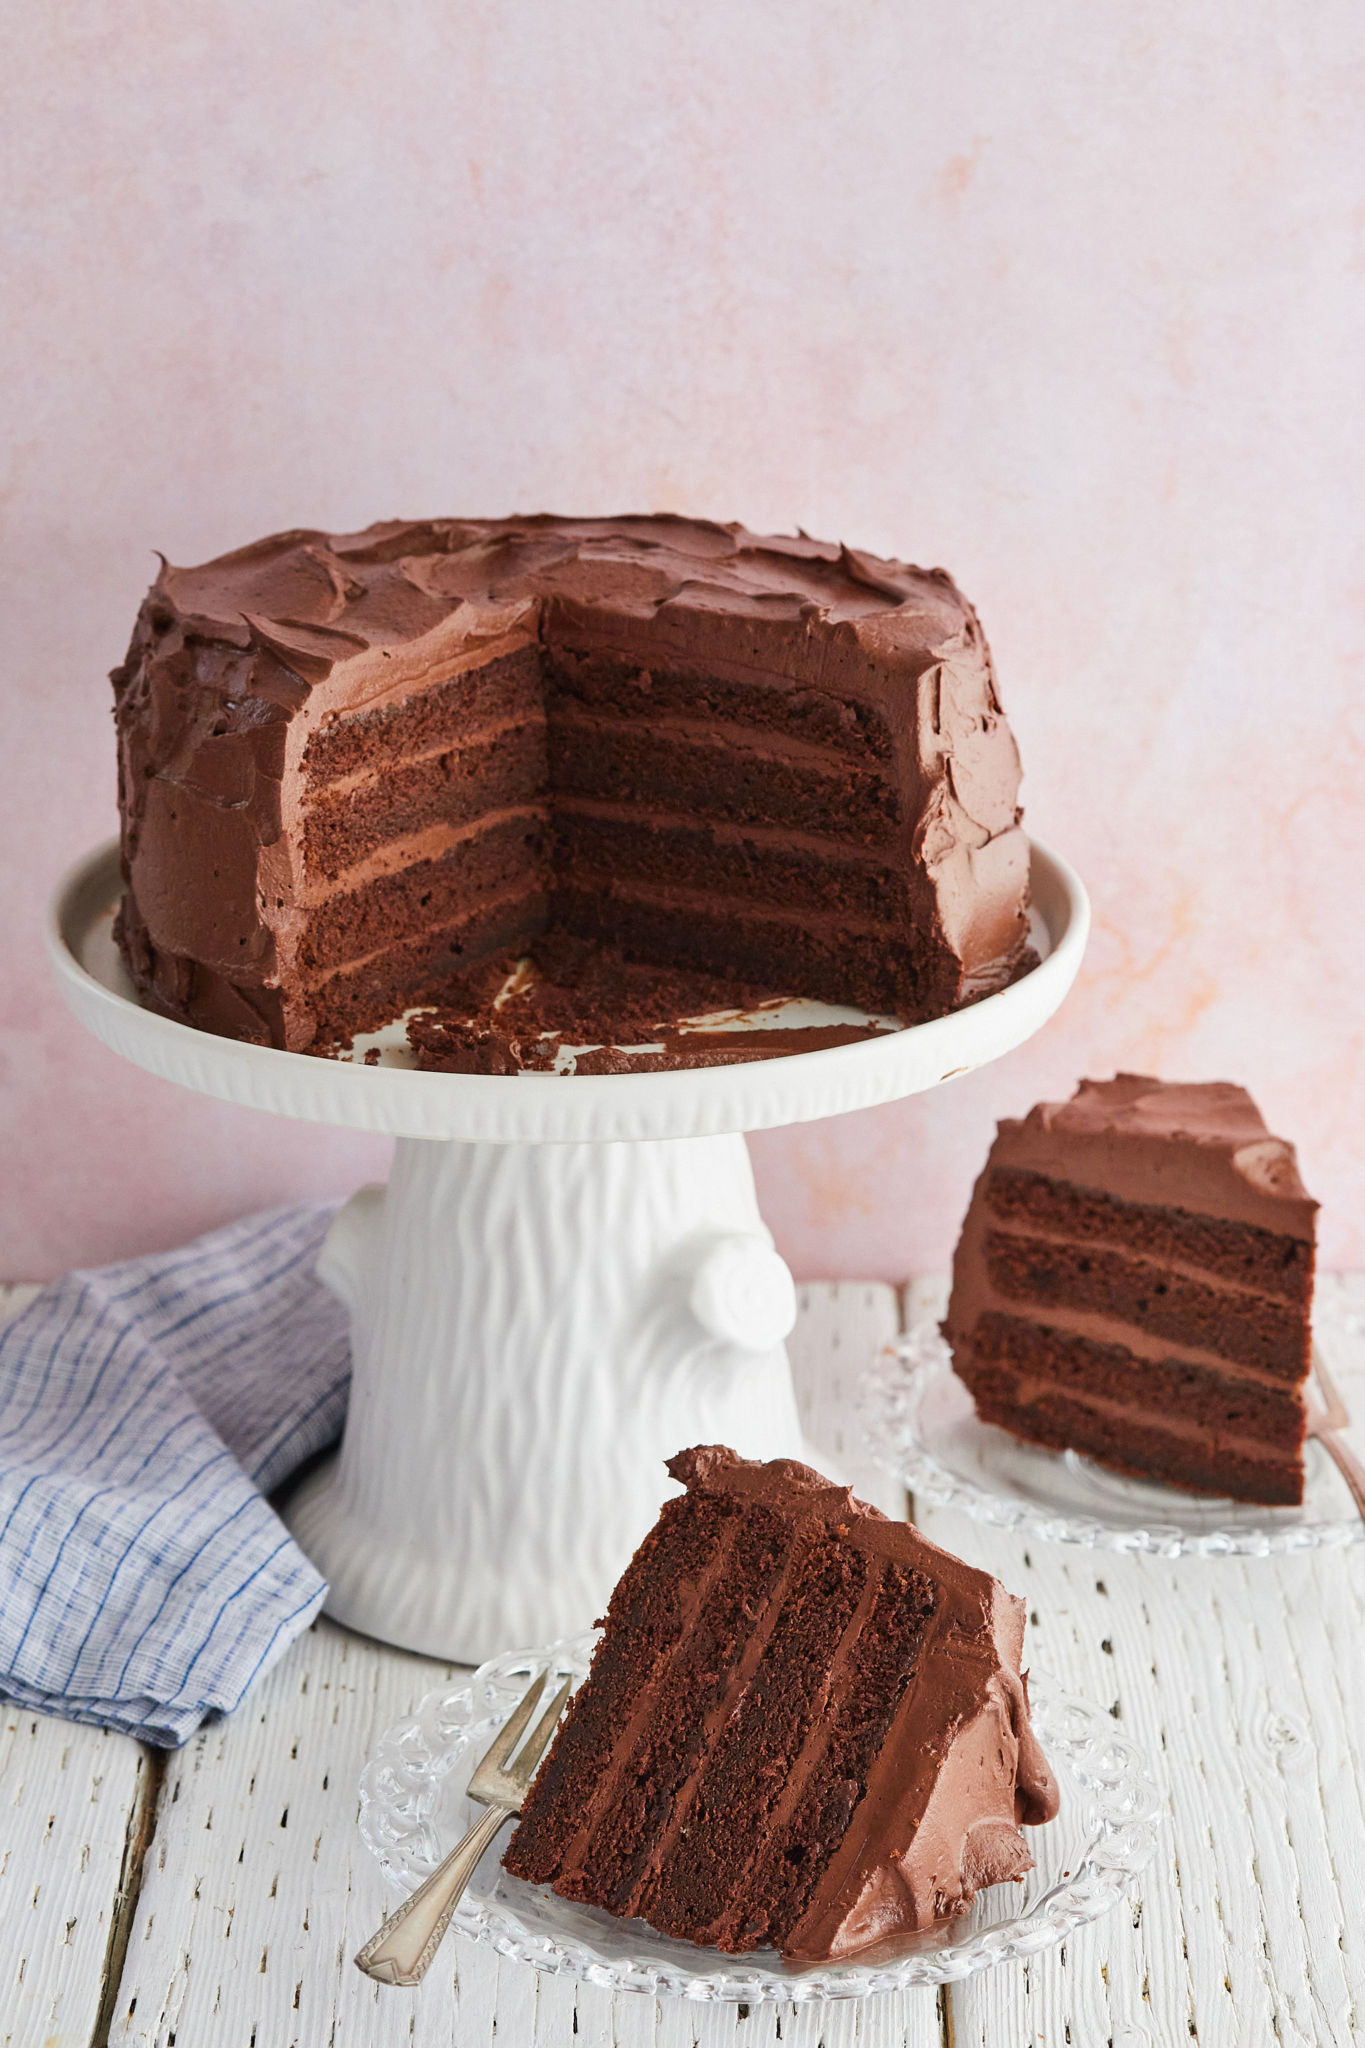 Two slices of chocolate cake ready to serve.